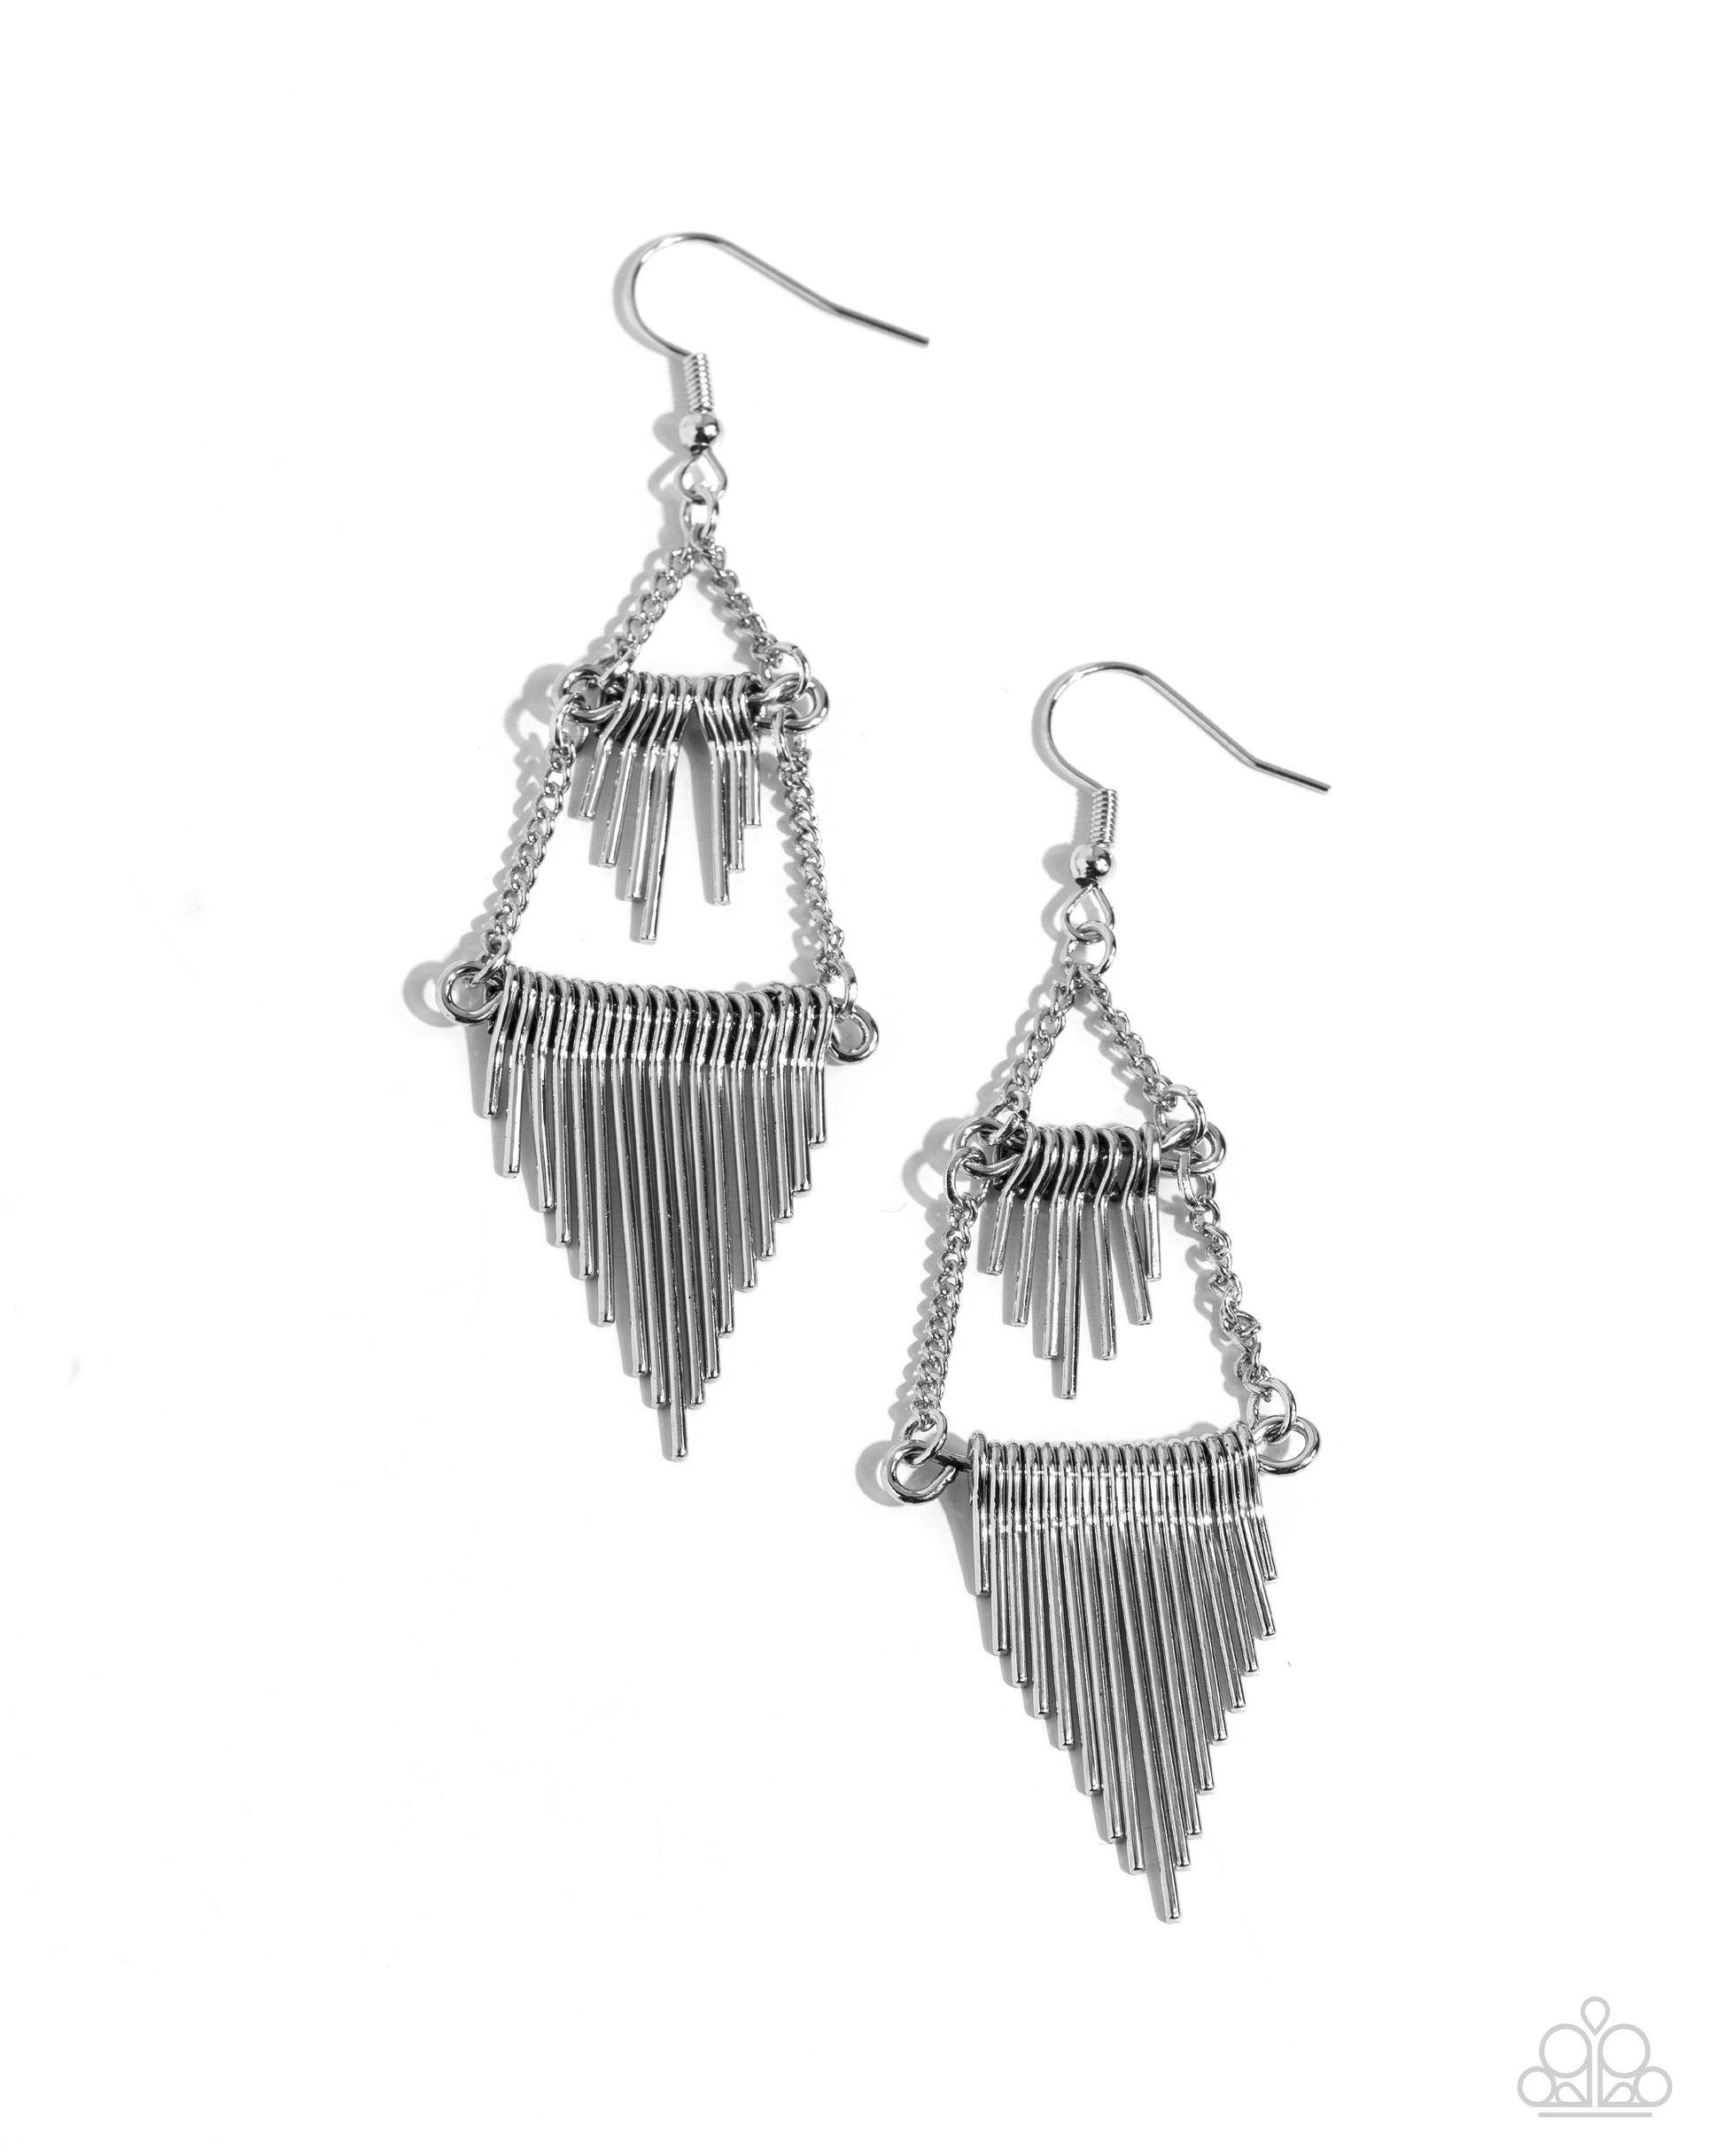 Greco Grotto - silver - Paparazzi earrings